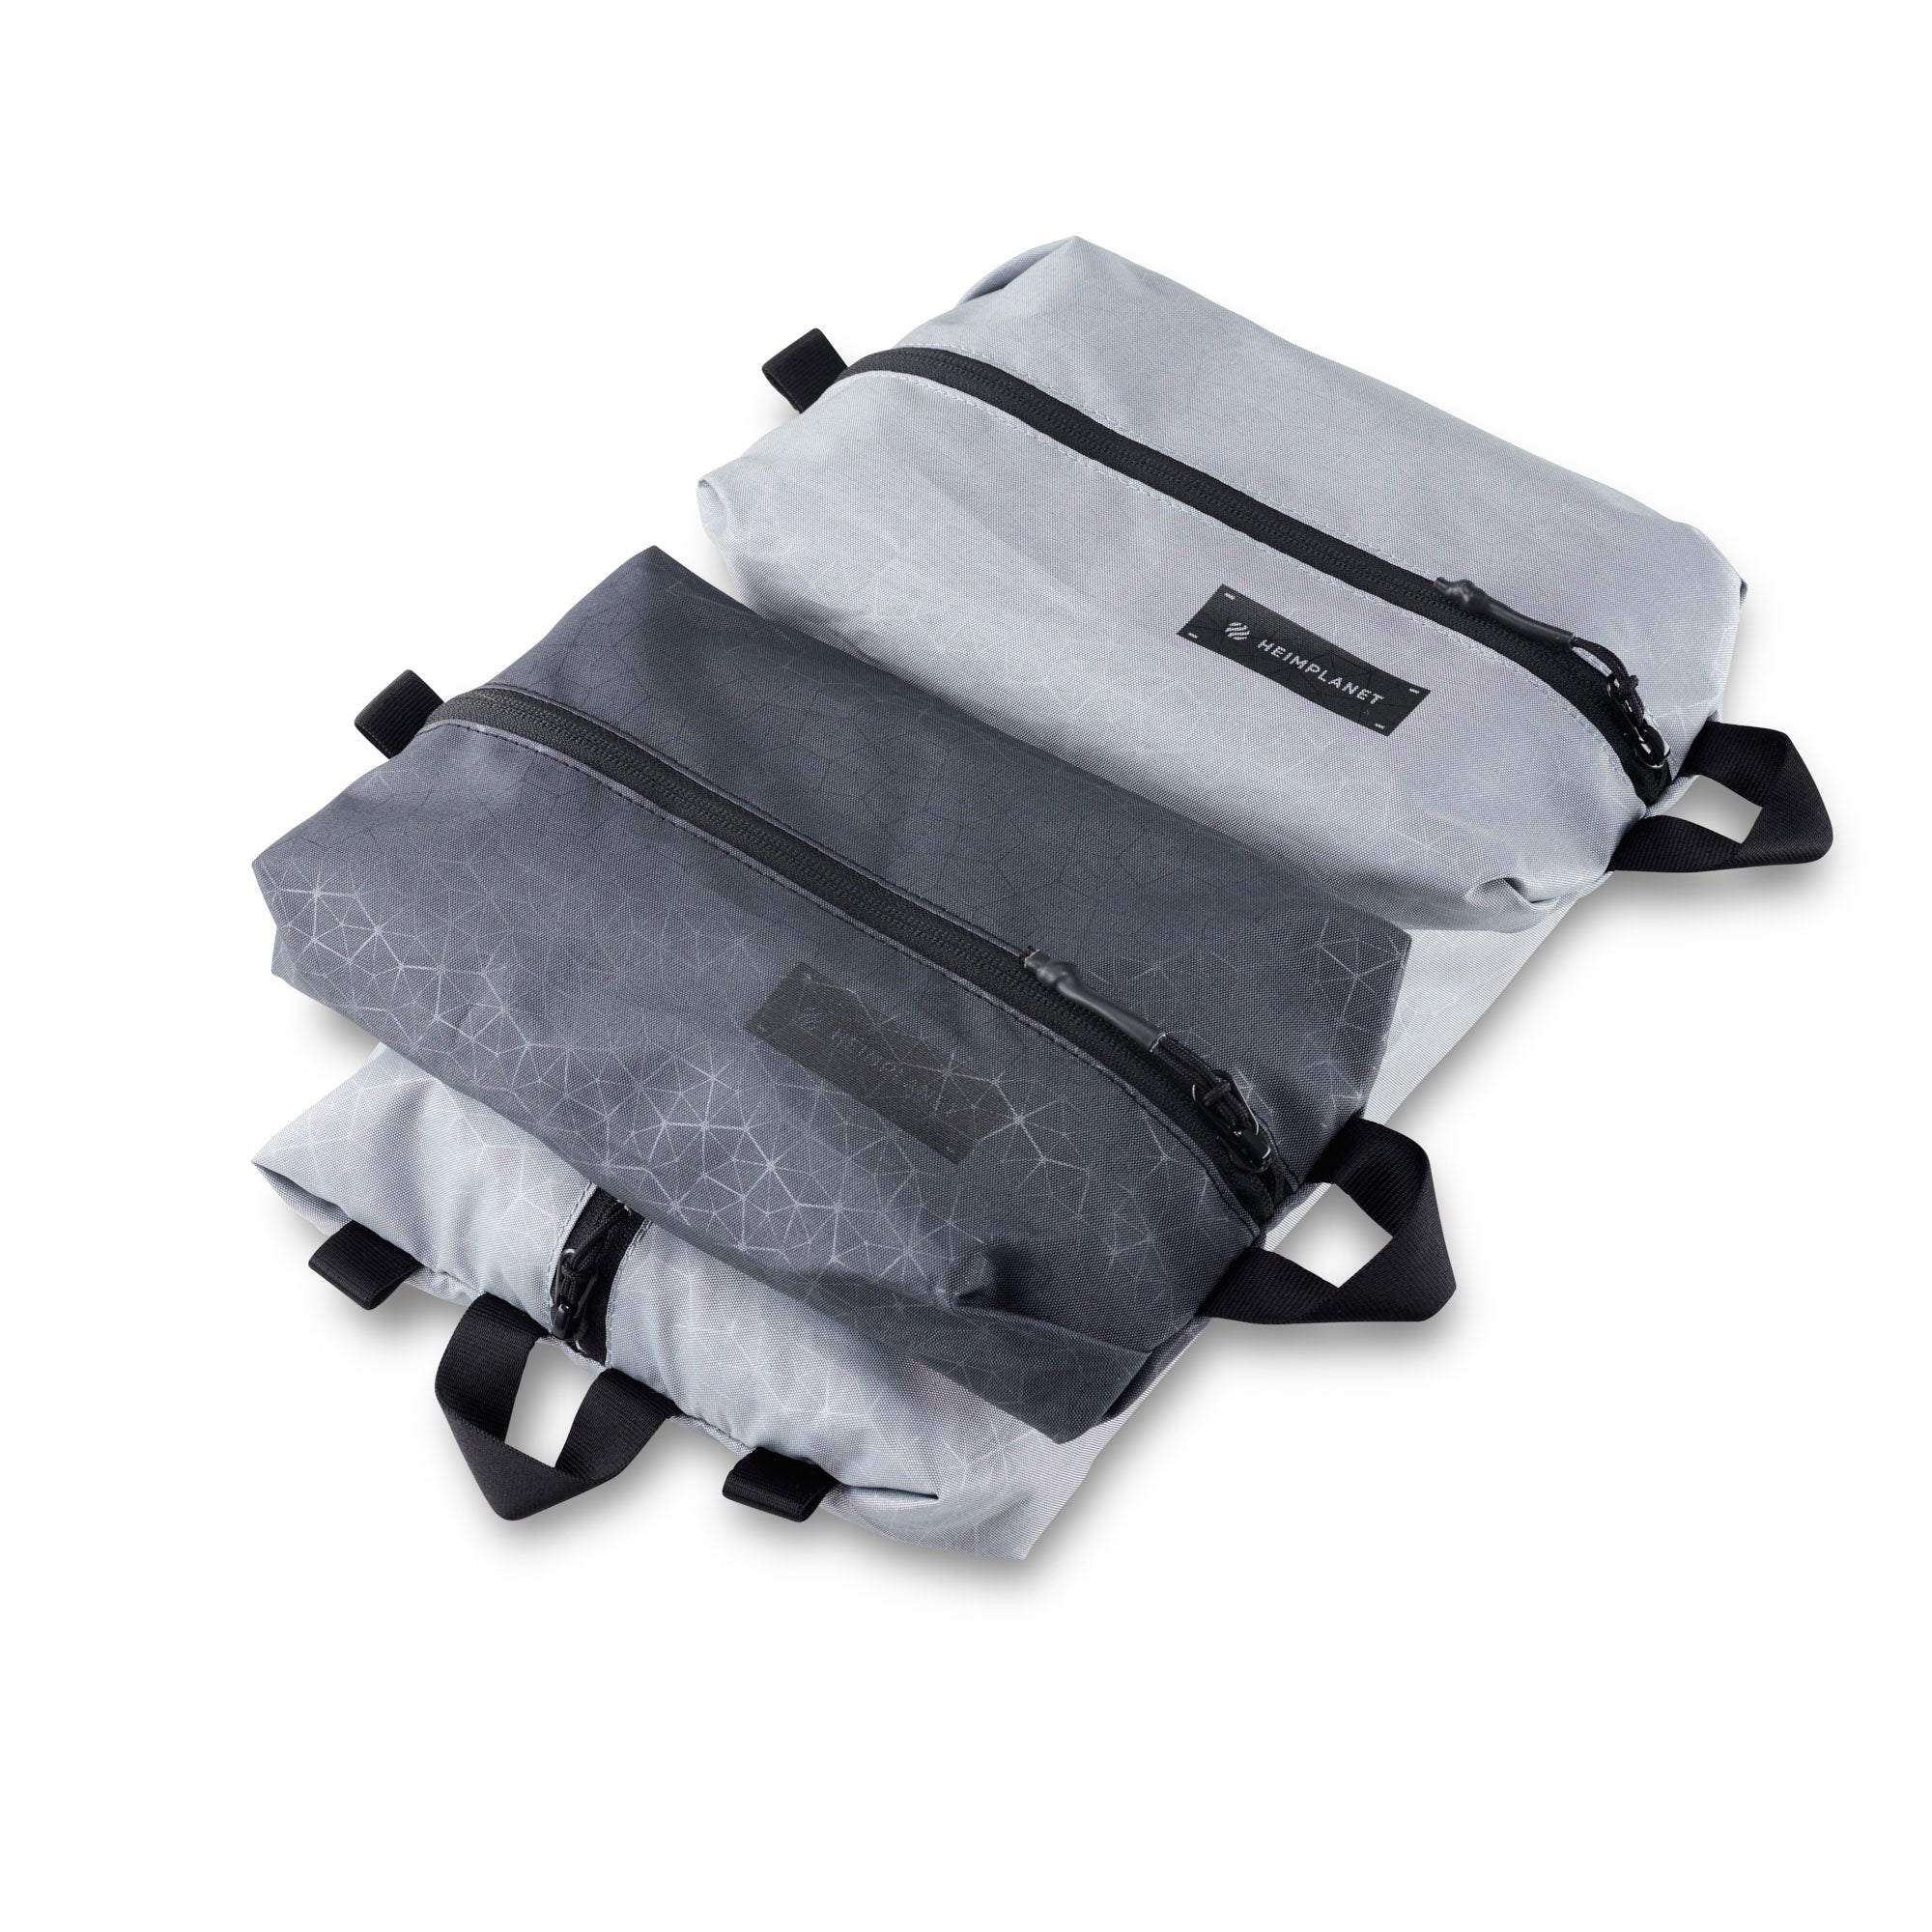 CARRY ESSENTIALS PACKING CUBES (SET) - Fjord